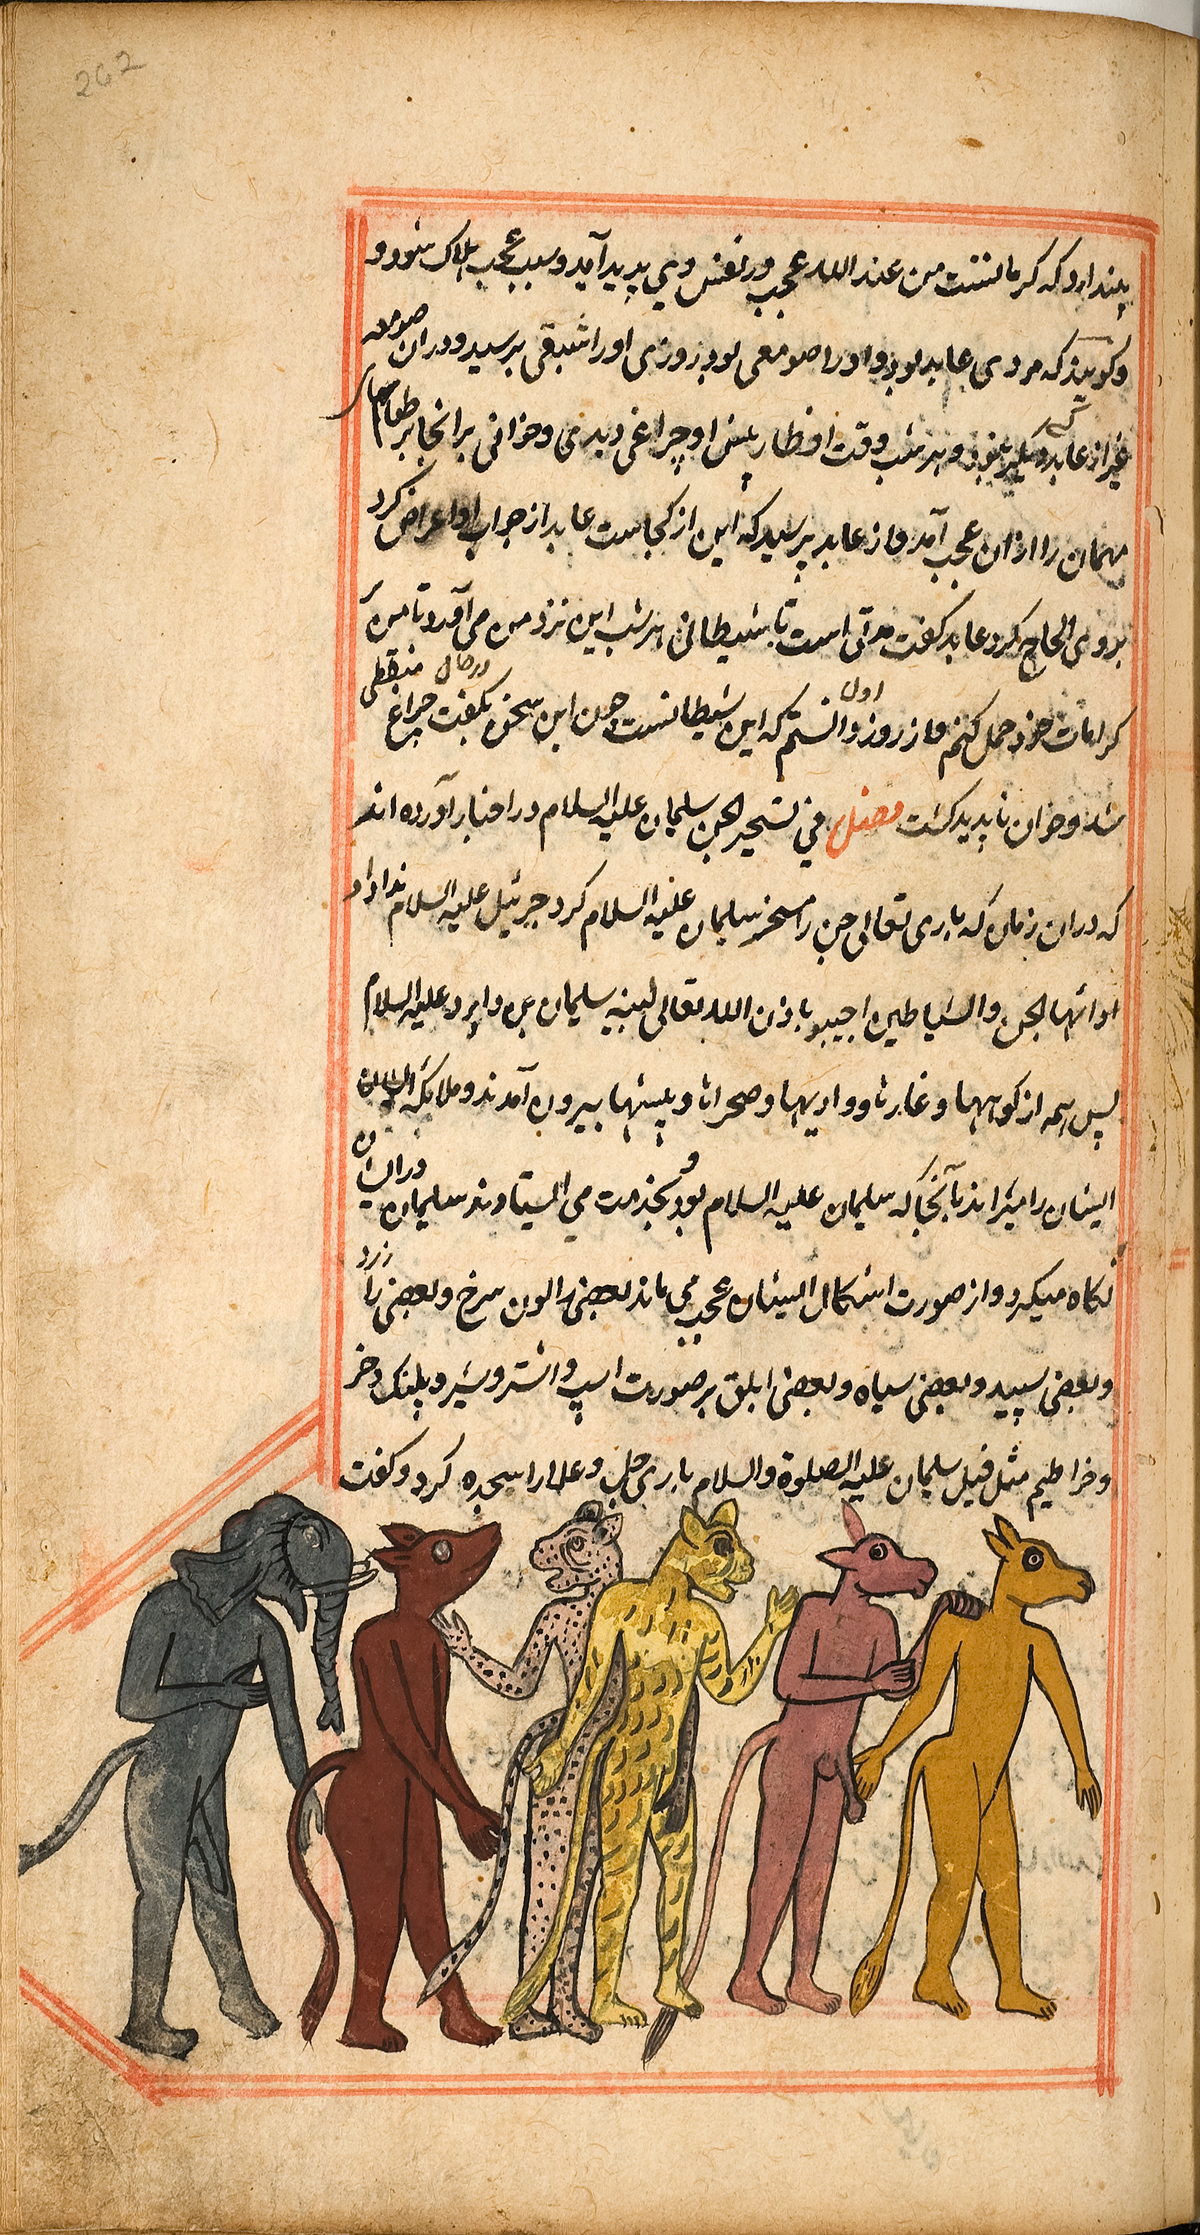 Six humanoid jinns, divs, and devils standing upright and lined up at the bottom of the page with text in Persian above: the first from the left is gray with a human body and head and tail of an elephant; the second is brown with a long tail and head of a deer; the third is pink with leopard spots and a tail turned to the left and addressing the brown figure; the fourth is yellow with leopard spots and tail addressing the fellow on his right; the fifth is purple with a cow’s head and tail; and the sixth is gold with a deer’s head and long tail.  The page is surrounded by a red double ruled border.